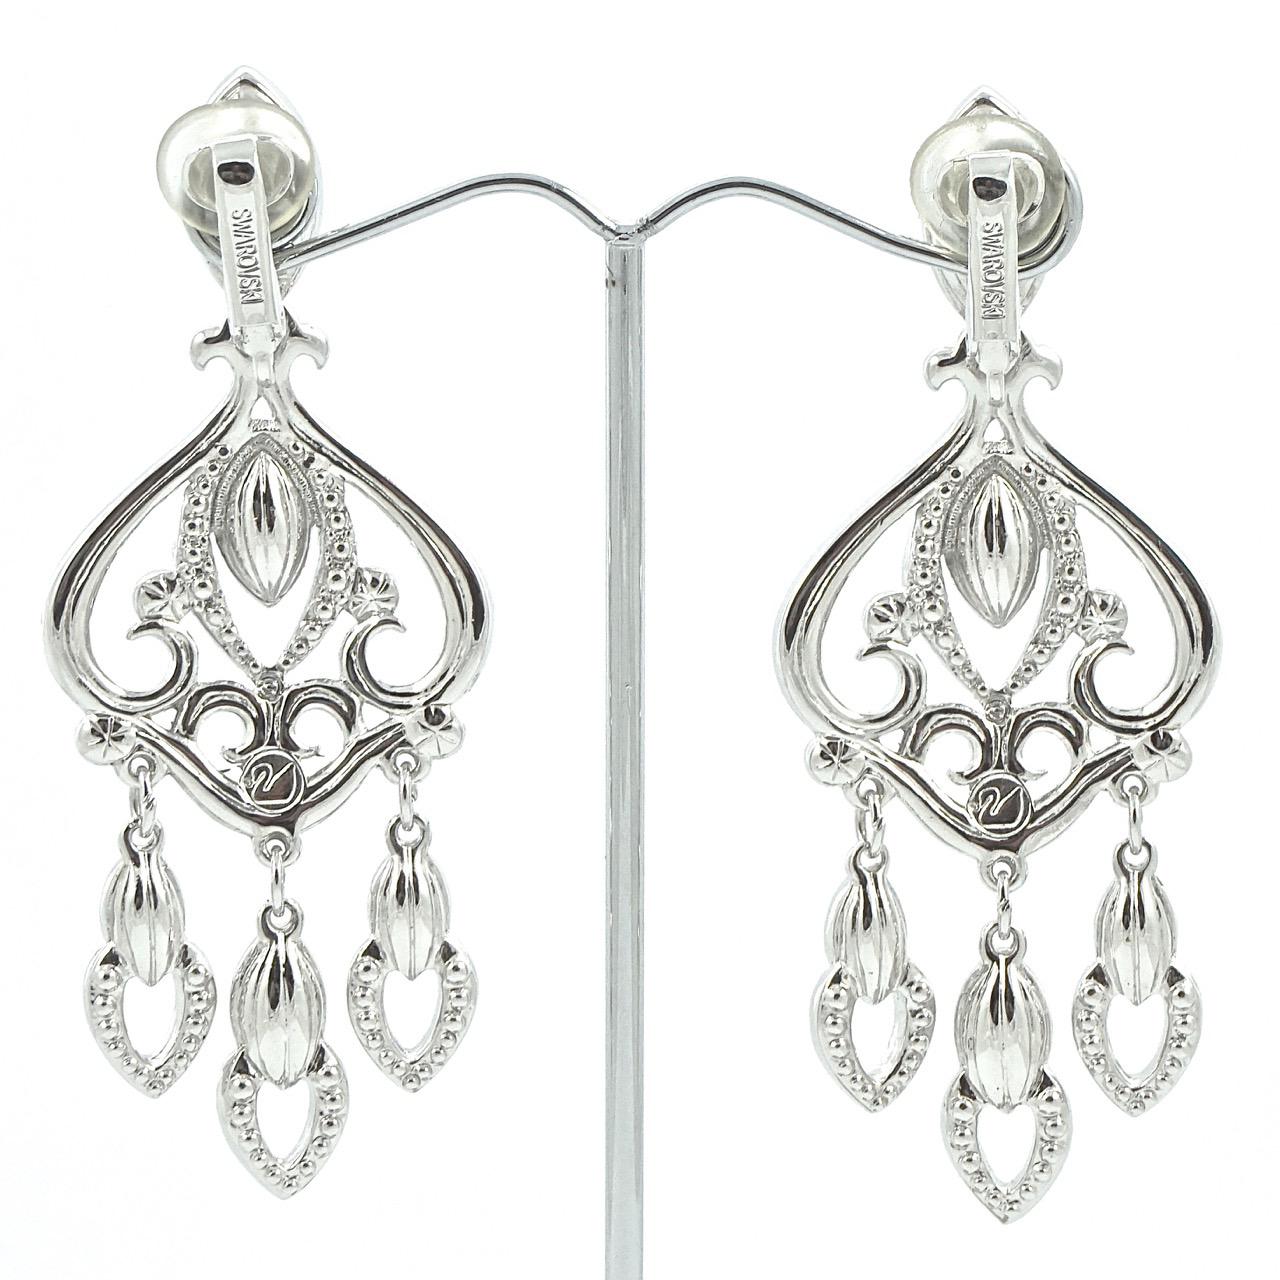 
Swarovski beautiful silver tone chandelier earrings set with clear faceted marquise and round crystals. The earrings are stamped with the Swarovski swan logo. Length 7.6cm / 3 inches by width 2.9cm / 1.14 inches. The earrings are in very good